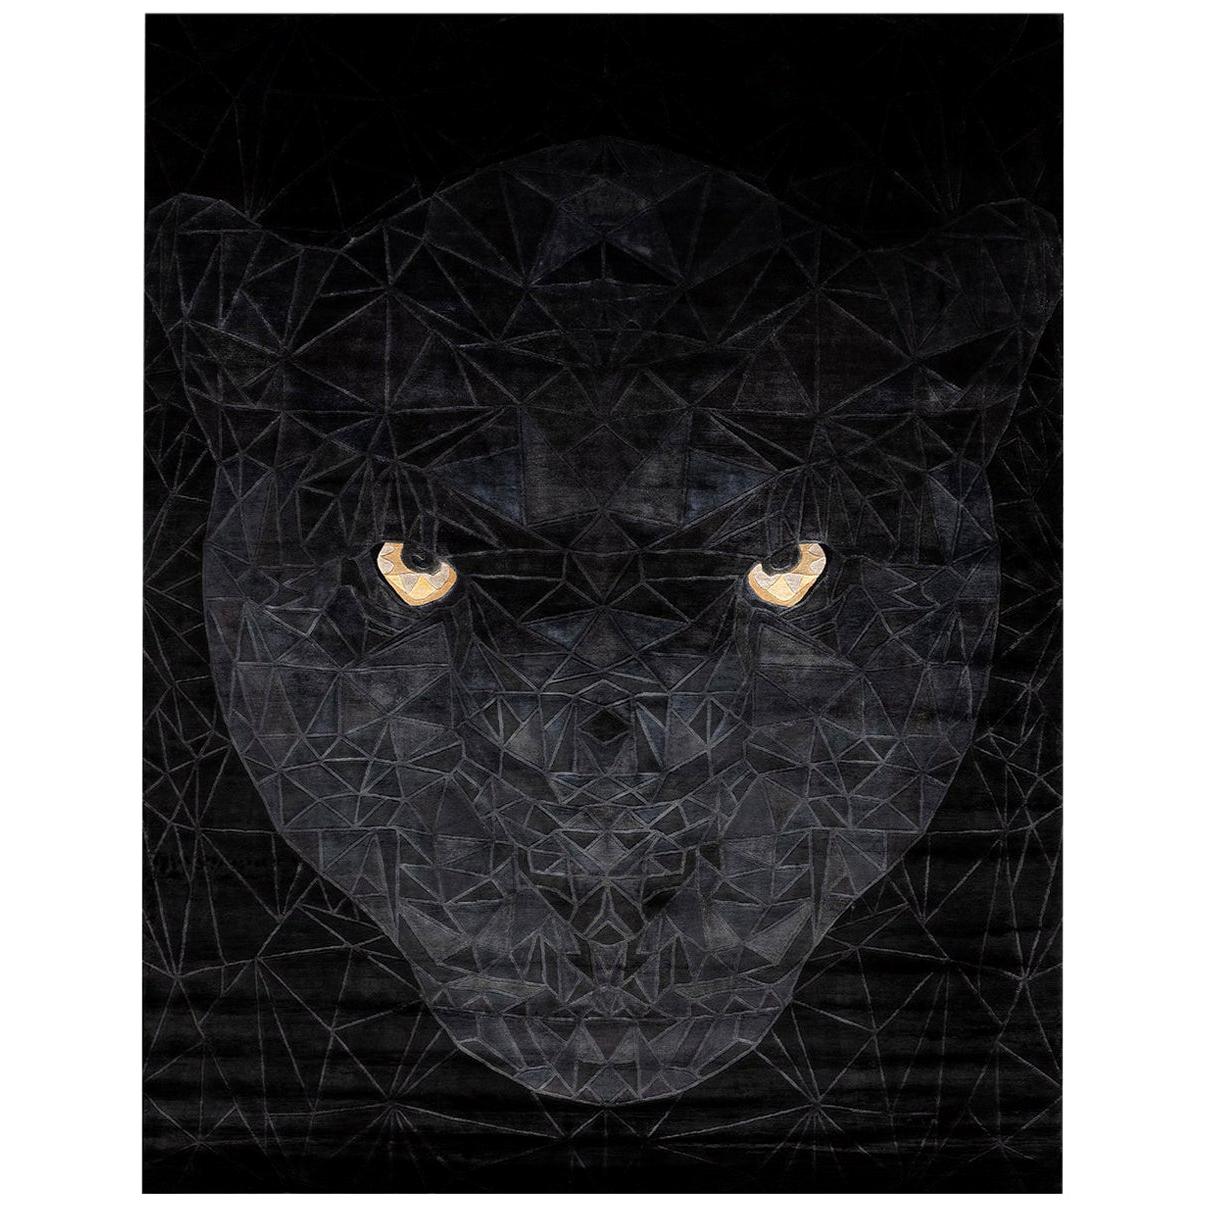 Panther Rug by Illulian Design Studio